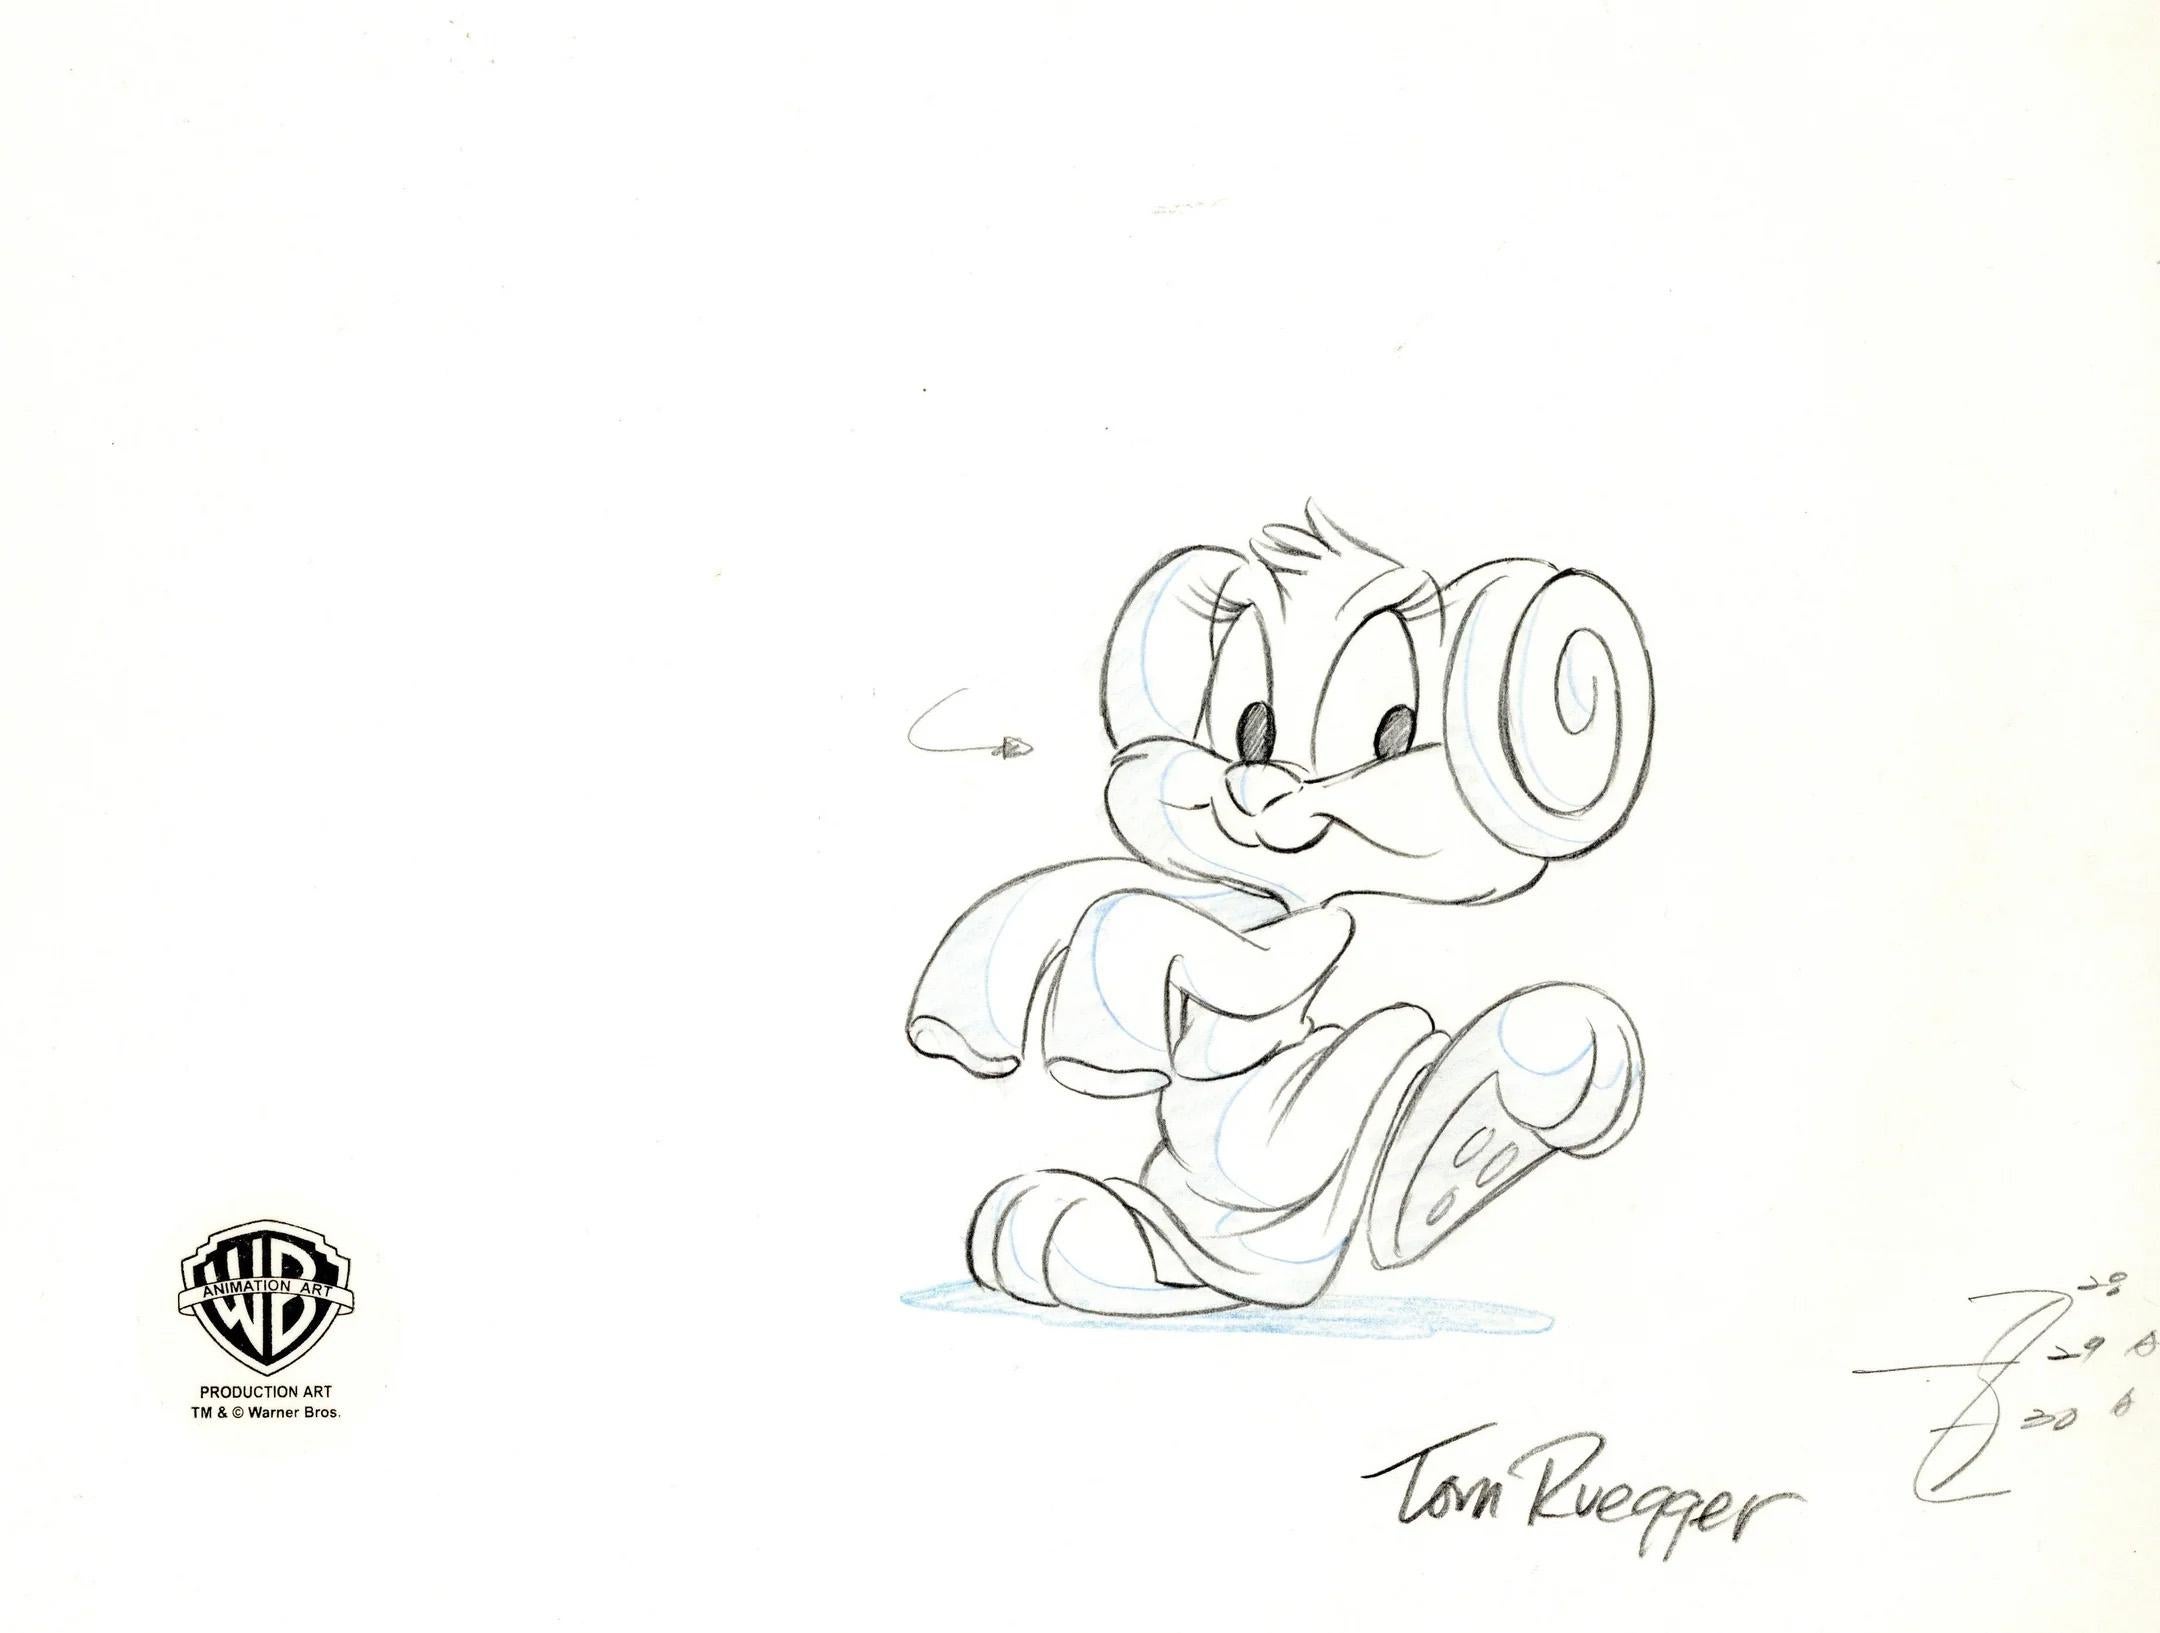 Tiny Toons Original Production Drawing Signed by Tom Ruegger: Babs Bunny - Art by Warner Bros. Studio Artists